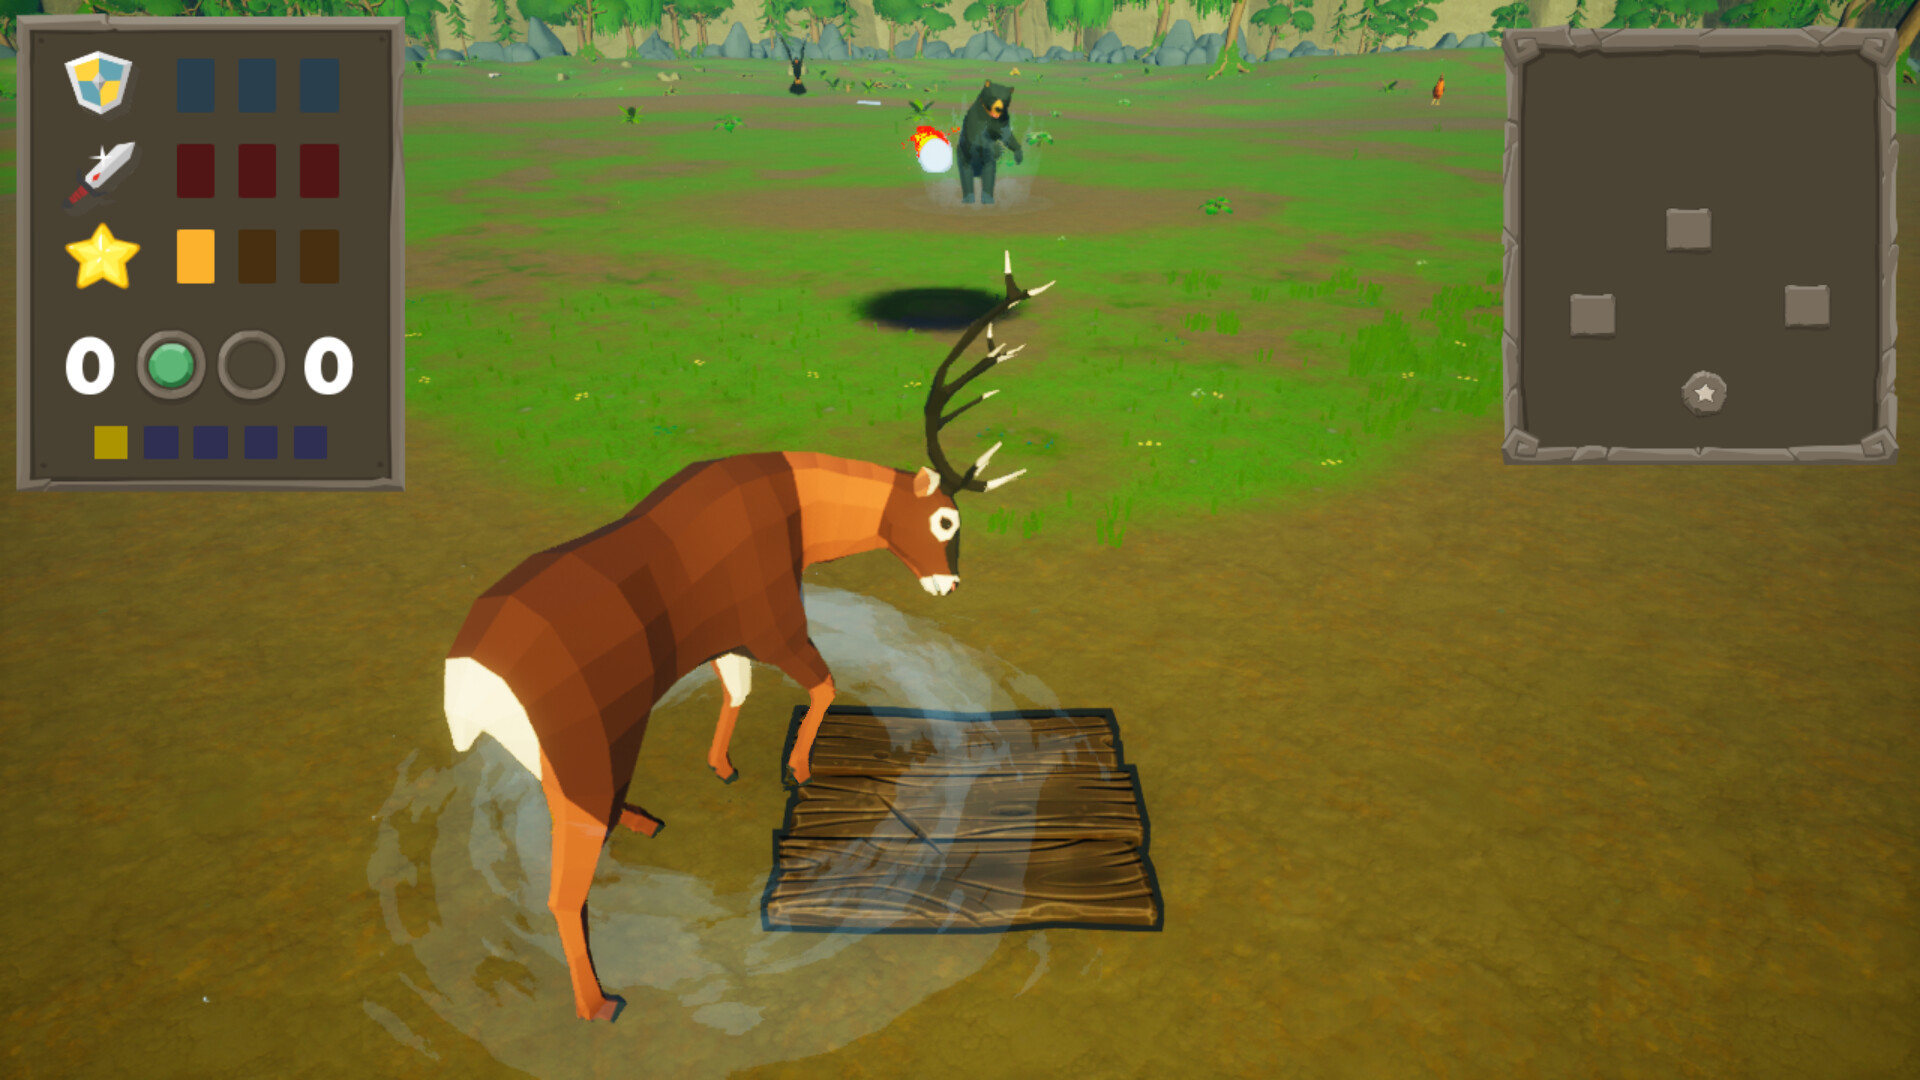 Warm up for the World Series with this free baseball game full of animals |  PC Gamer